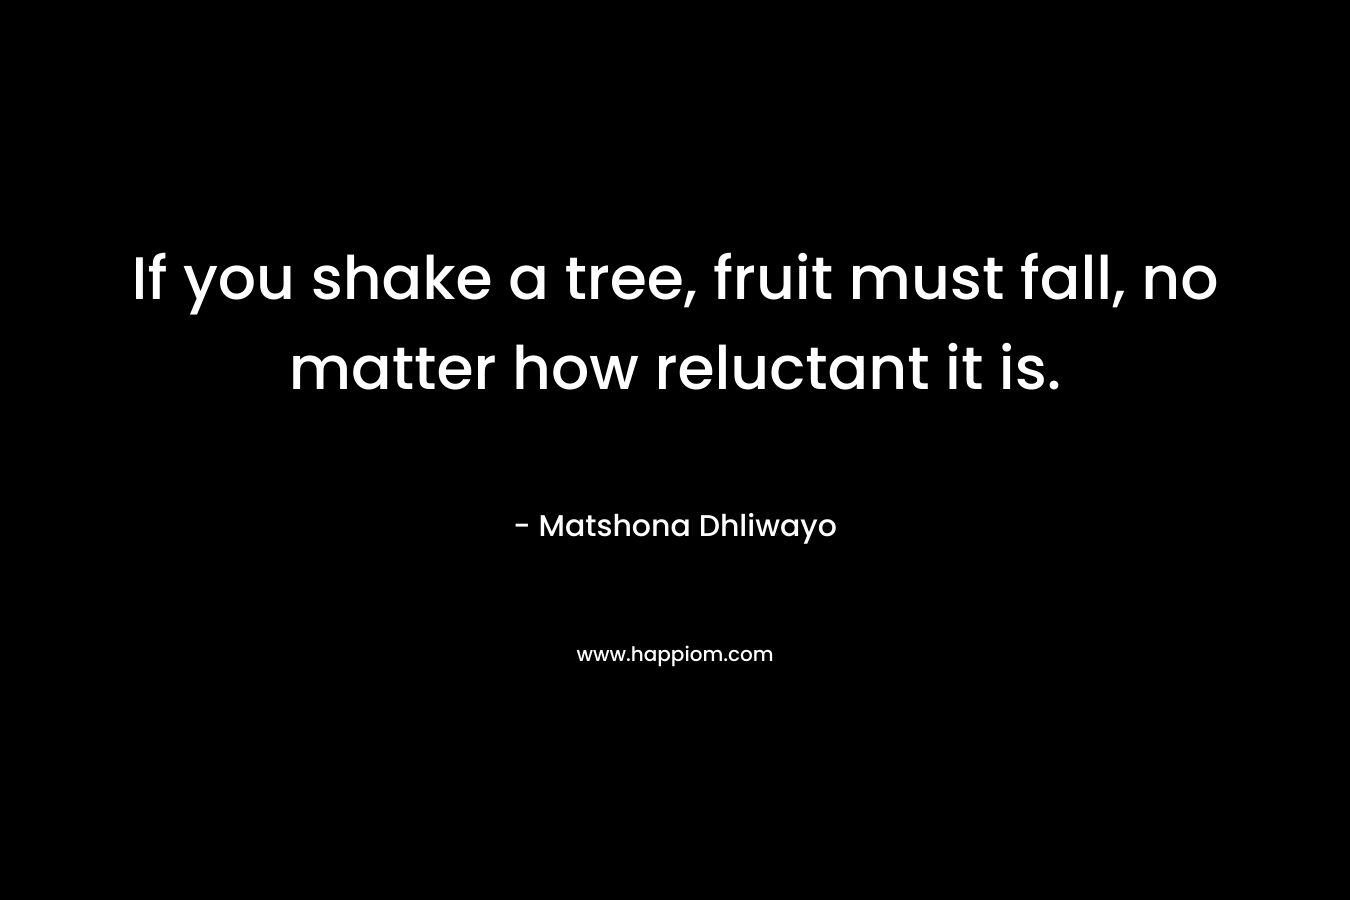 If you shake a tree, fruit must fall, no matter how reluctant it is. – Matshona Dhliwayo